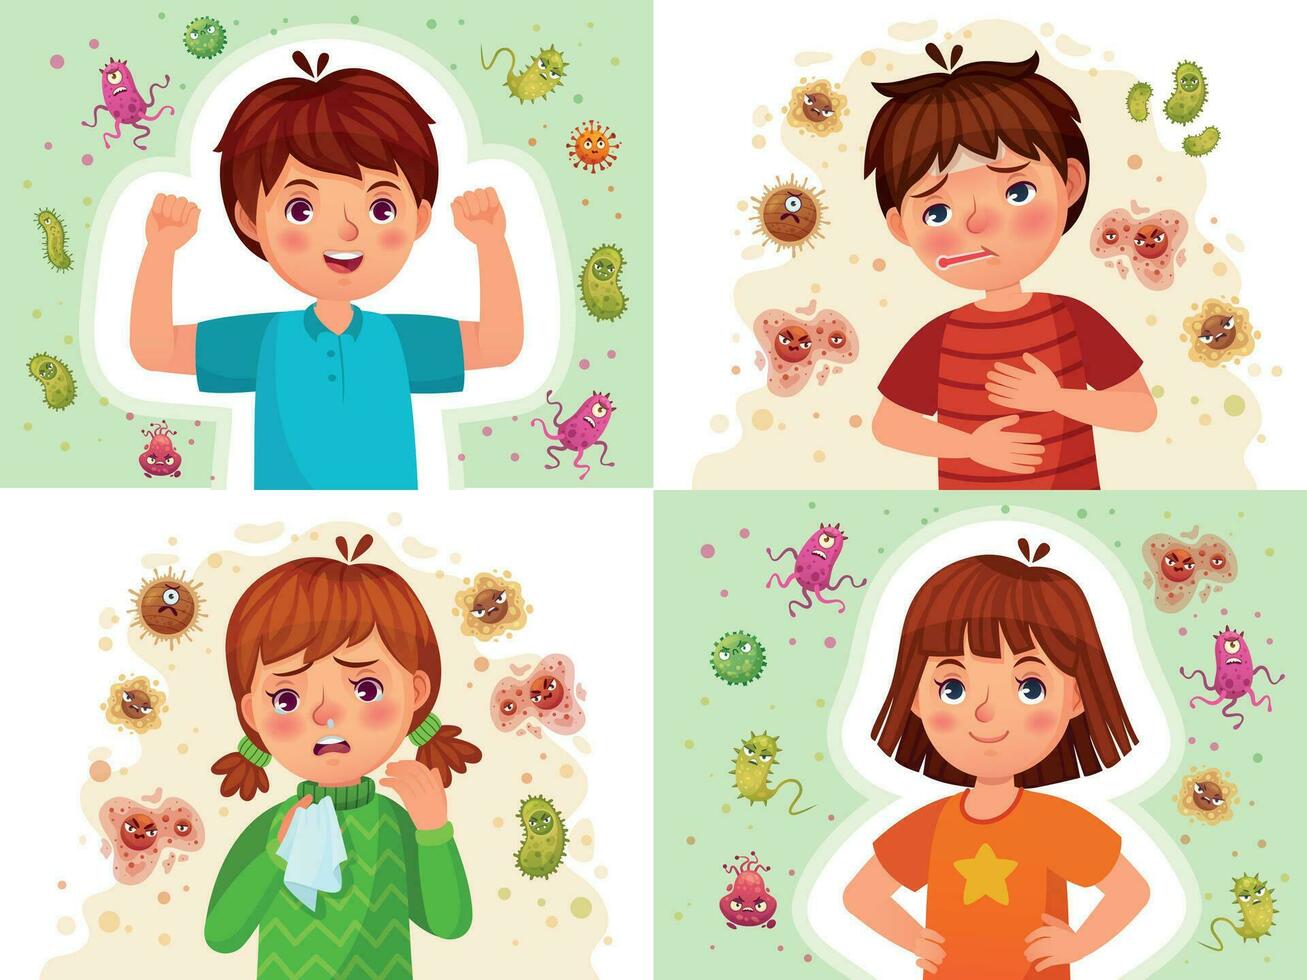 Child immune system. Healthy and sick kids, immune defence. Virus and bacterias protected boy and girl cartoon vector illustration set